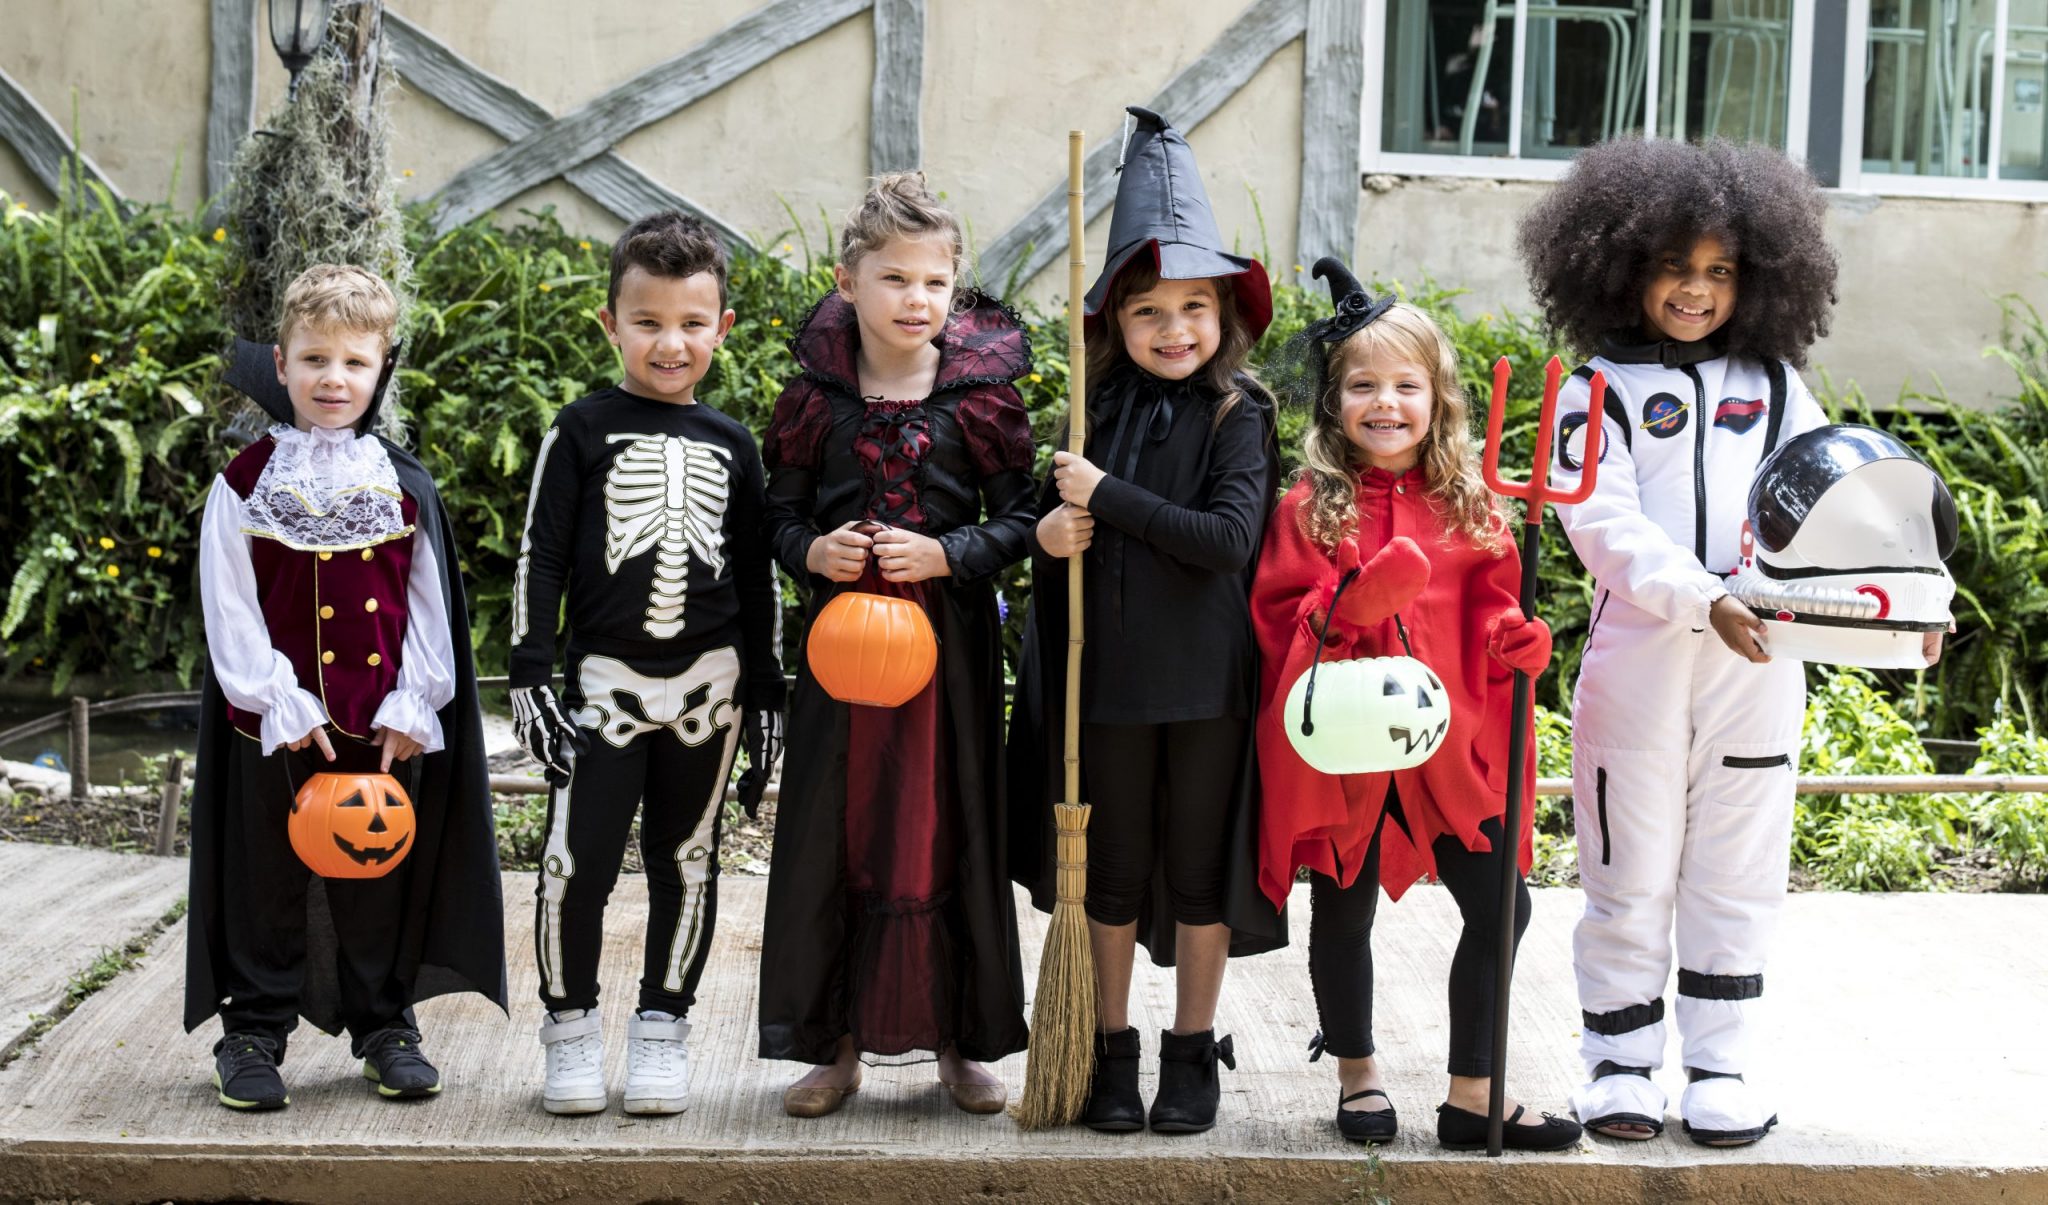 Last Minute Costume Ideas for the Kids